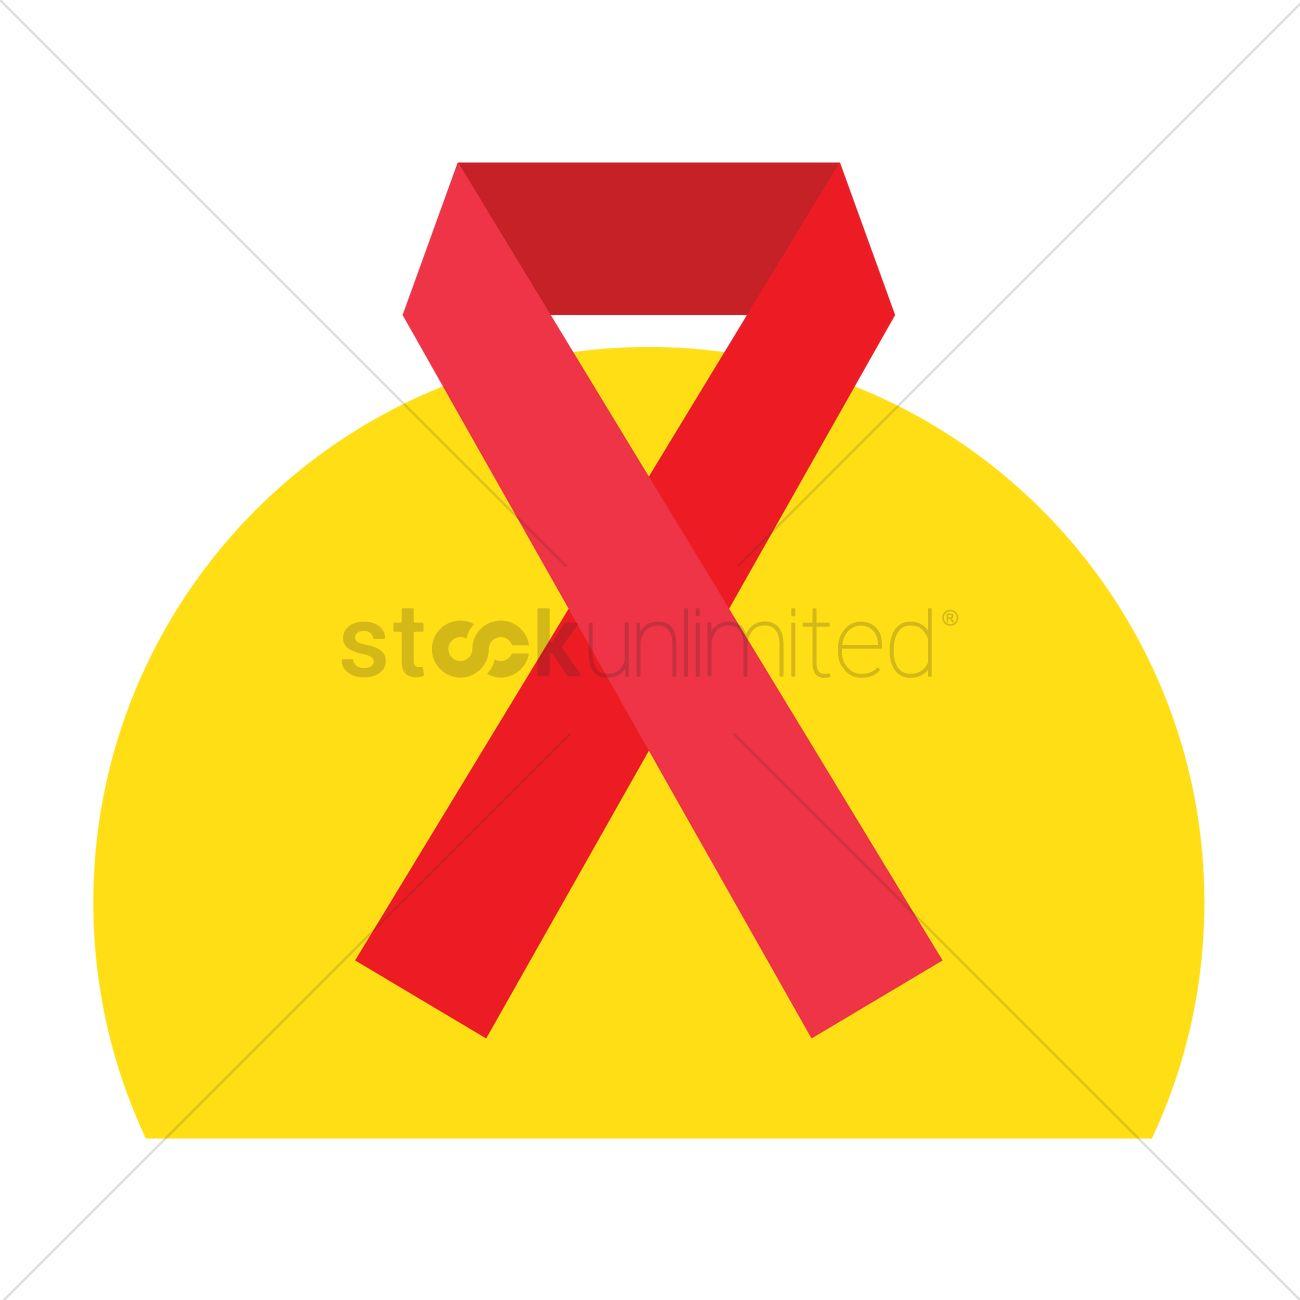 Red Robbon and Yellow Logo - Red ribbon symbol Vector Image